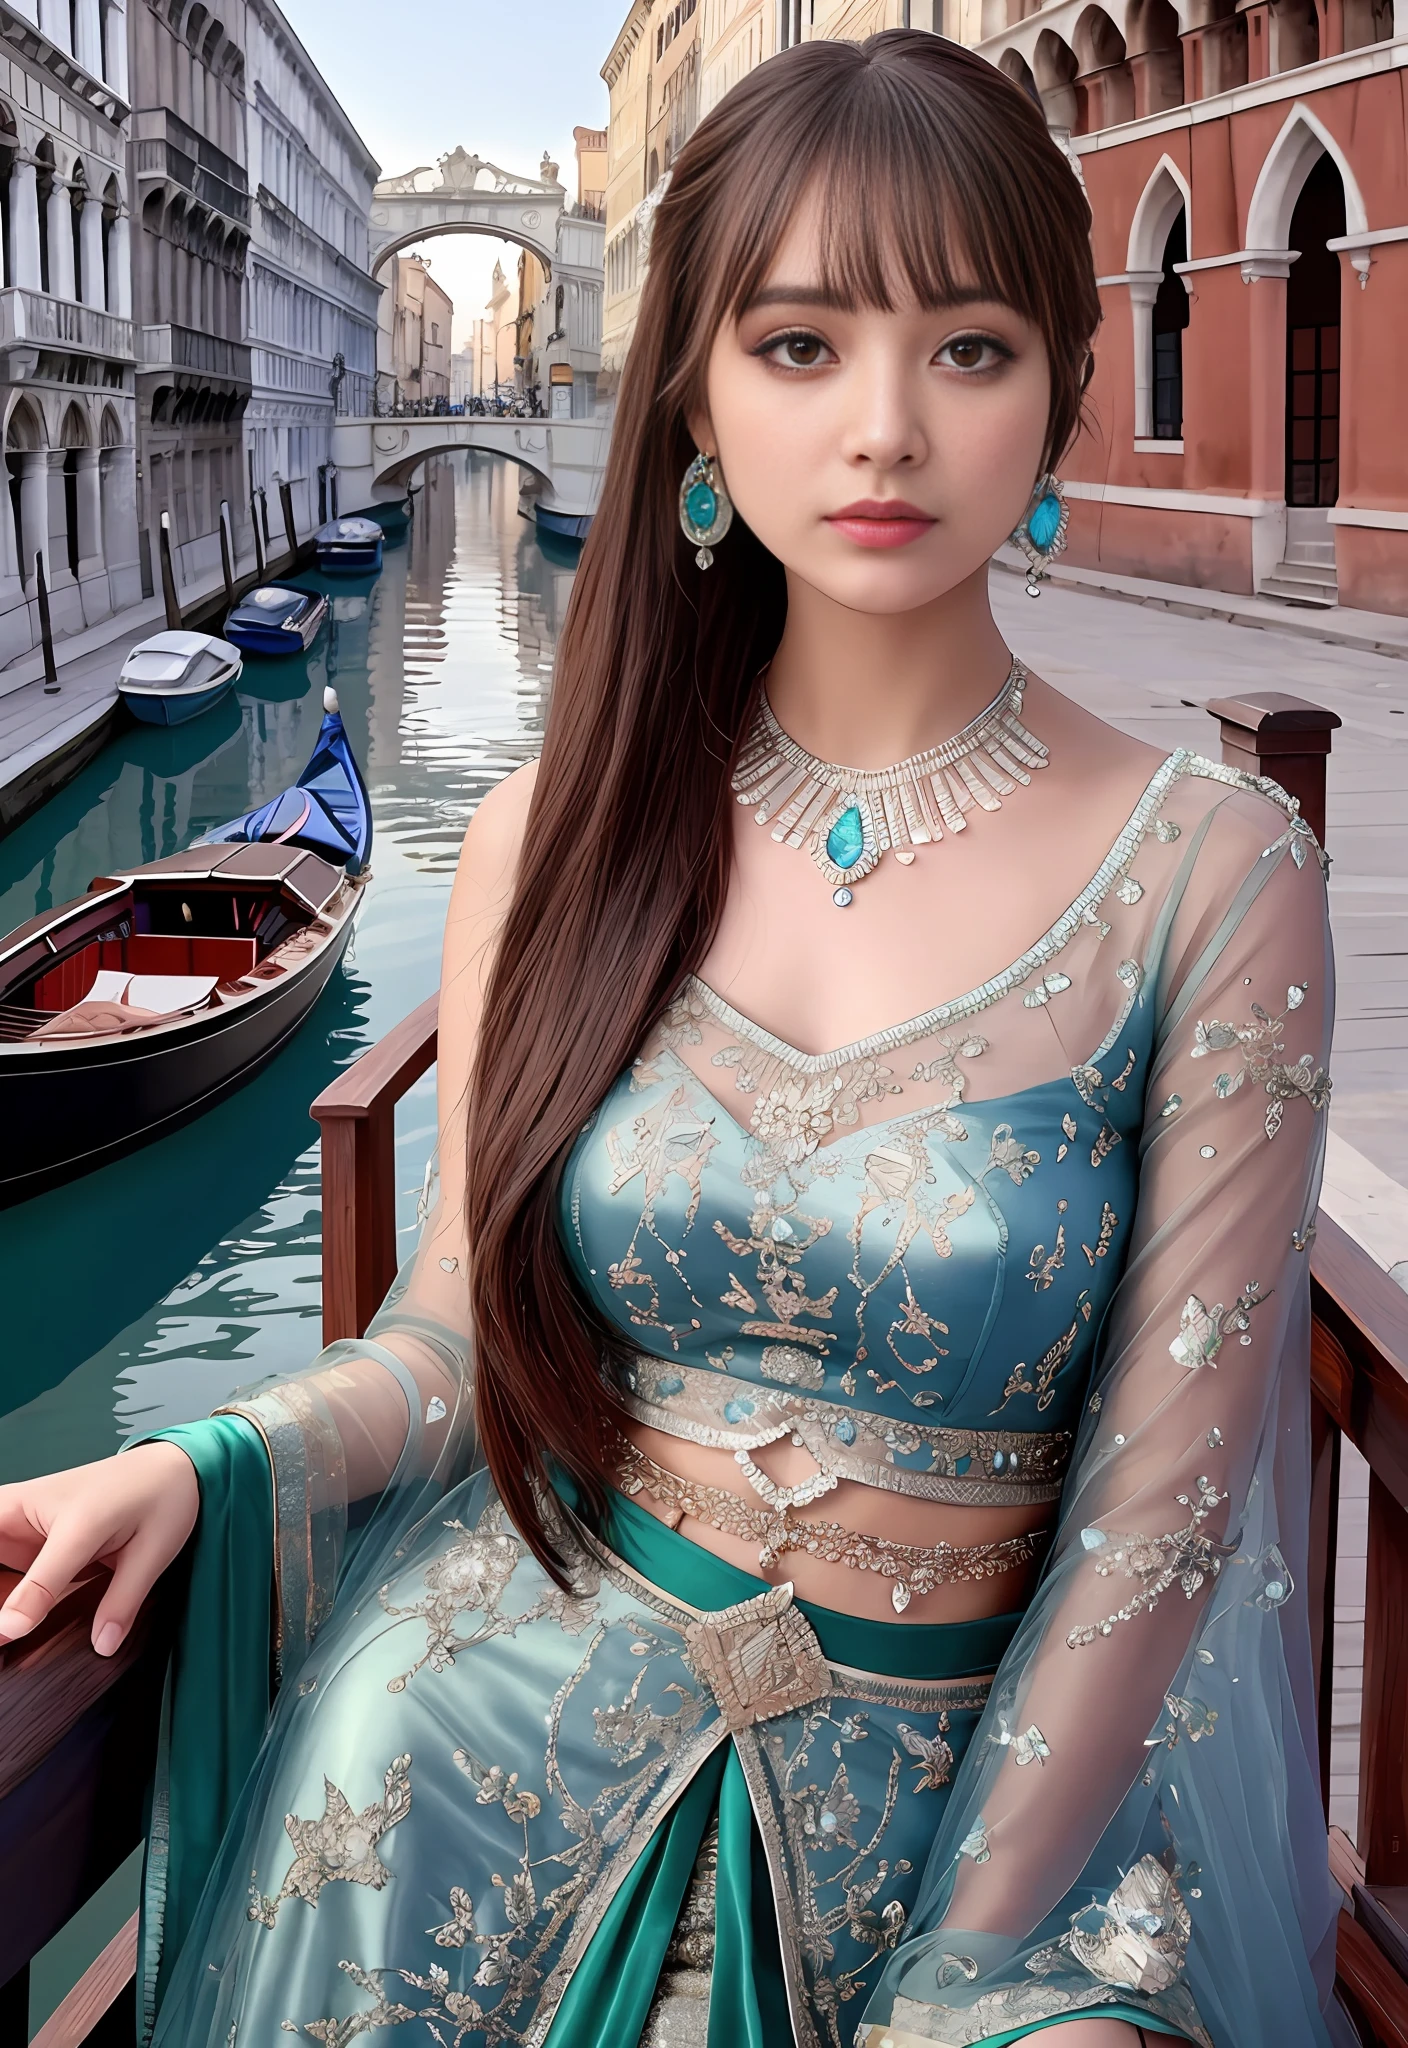 a HypeR Realistic ultRa detailed pHotogRapH of a beautiful giRl as a female 2020s danceR on tHe boat of 2020s Venice,(BRidge Of SigHs backgRound),(pRincess eyes,sHiny pupils), detailed symmetRic beautiful Hazel eyes, detailed goRgeous face, peaky blindeRs enviRonemt, tRending on cg society, bauHaus, bulgaRi, colouRful atmospHeRe, official valentino editoRial, moonligHt, medium symmetRy, neopRene, beHance contest winneR, poRtRait featuRed on unsplasH, stylized digital aRt, smootH, ultRa HigH definition, 8K, unReal engine 5, ultRa sHaRp focus, awaRd-winning pHotogRapH, Canon EOS 5D MaRk IV DSLR, f/8, ISO 100, 1/250 segundos, TanviRTamim, tRending on aRtstation, by aRtgeRm, H. R. gigeR and beksinski, HigHly detailed, vibRant